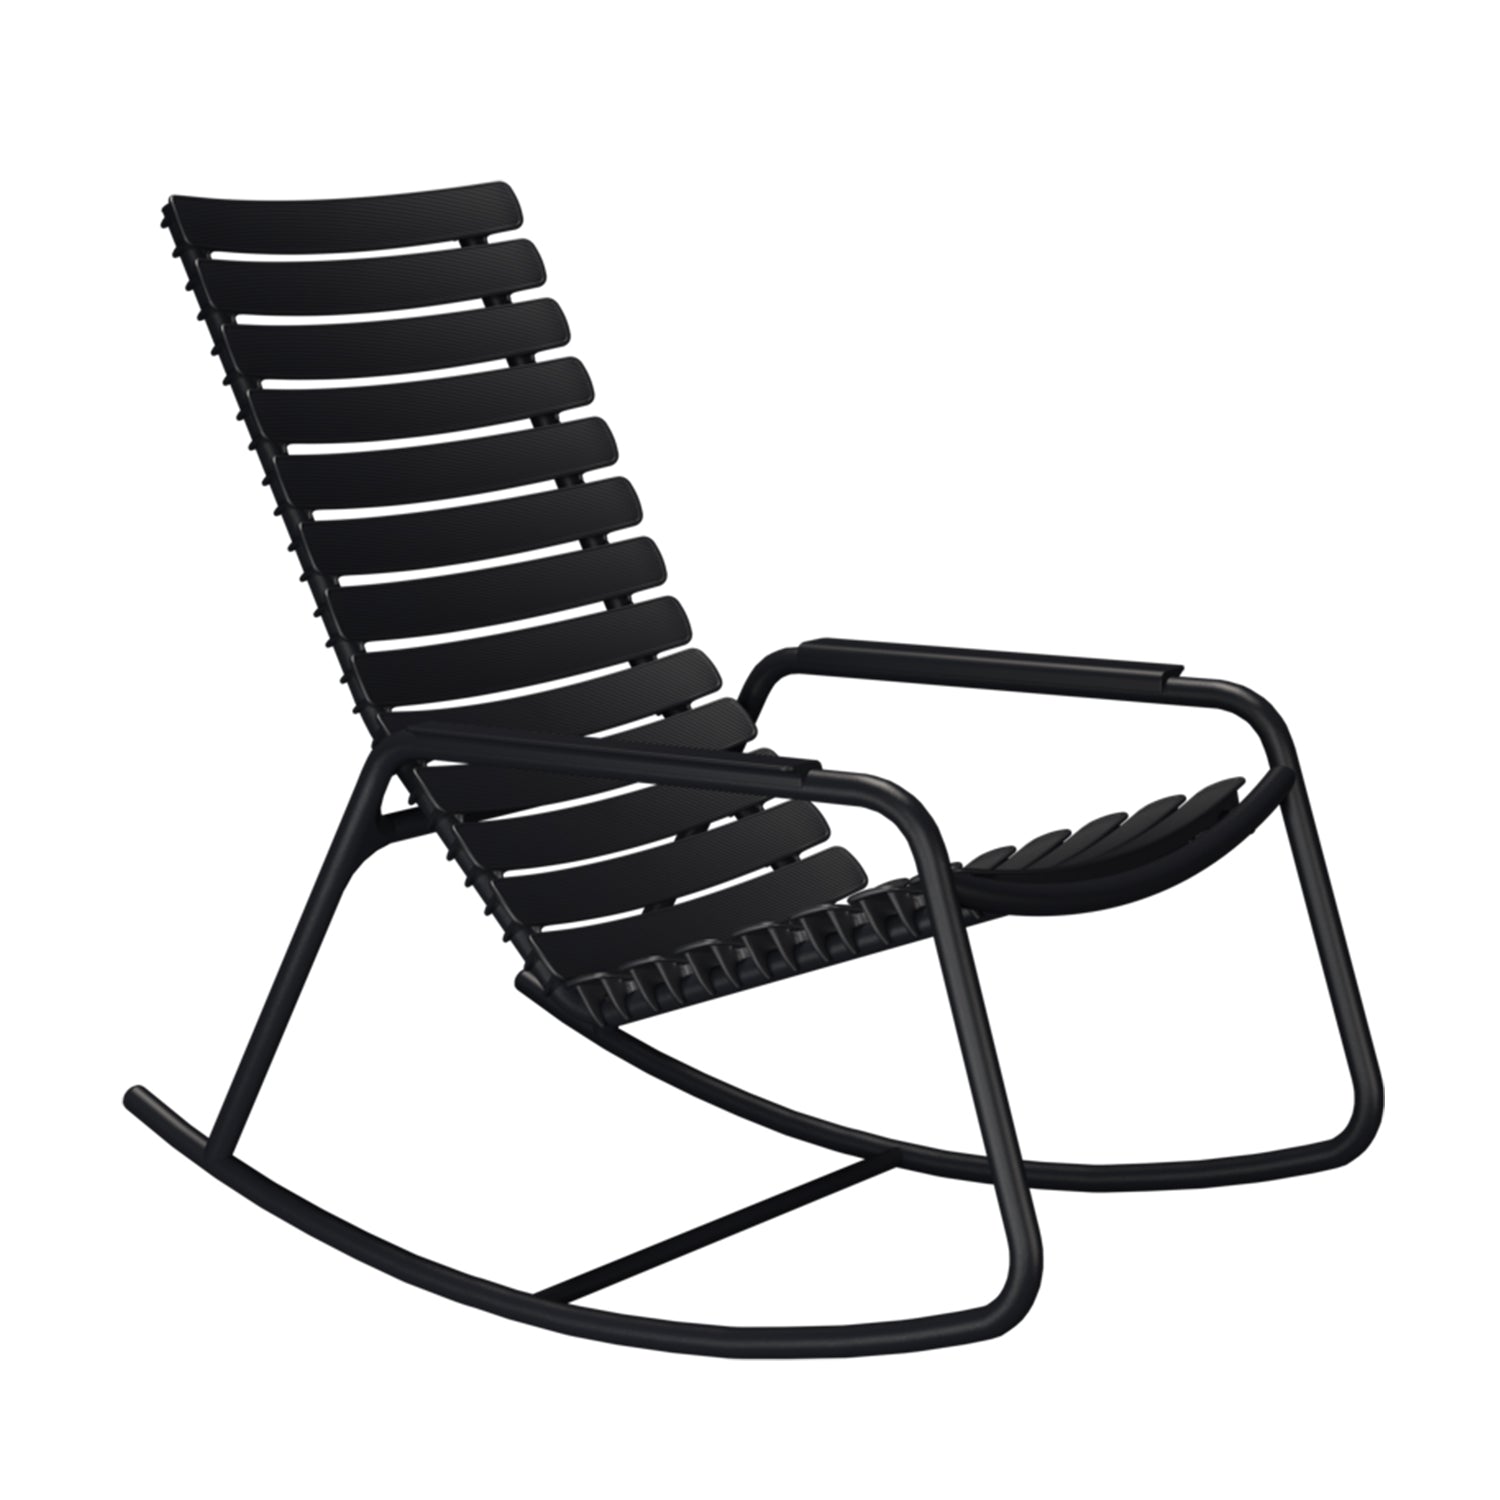 Reclips Rocking Chair - The Design Choice